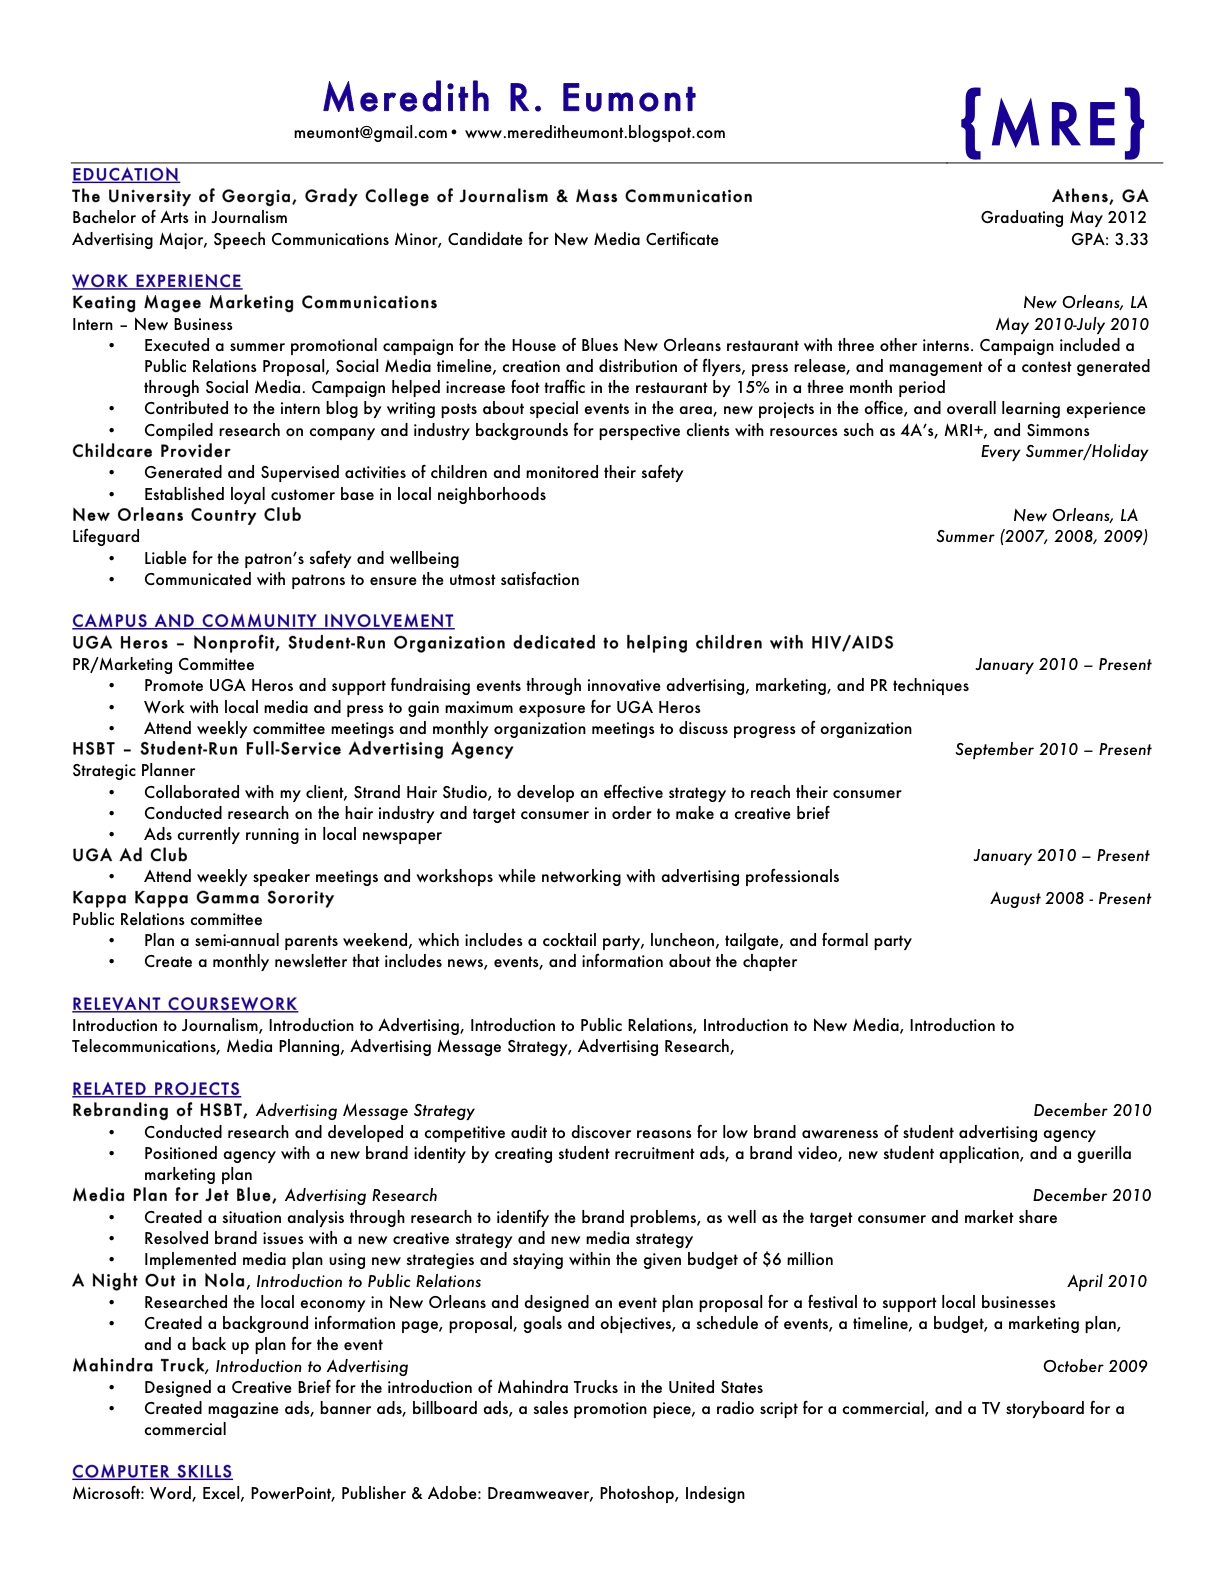 Where can i get free help with my resume